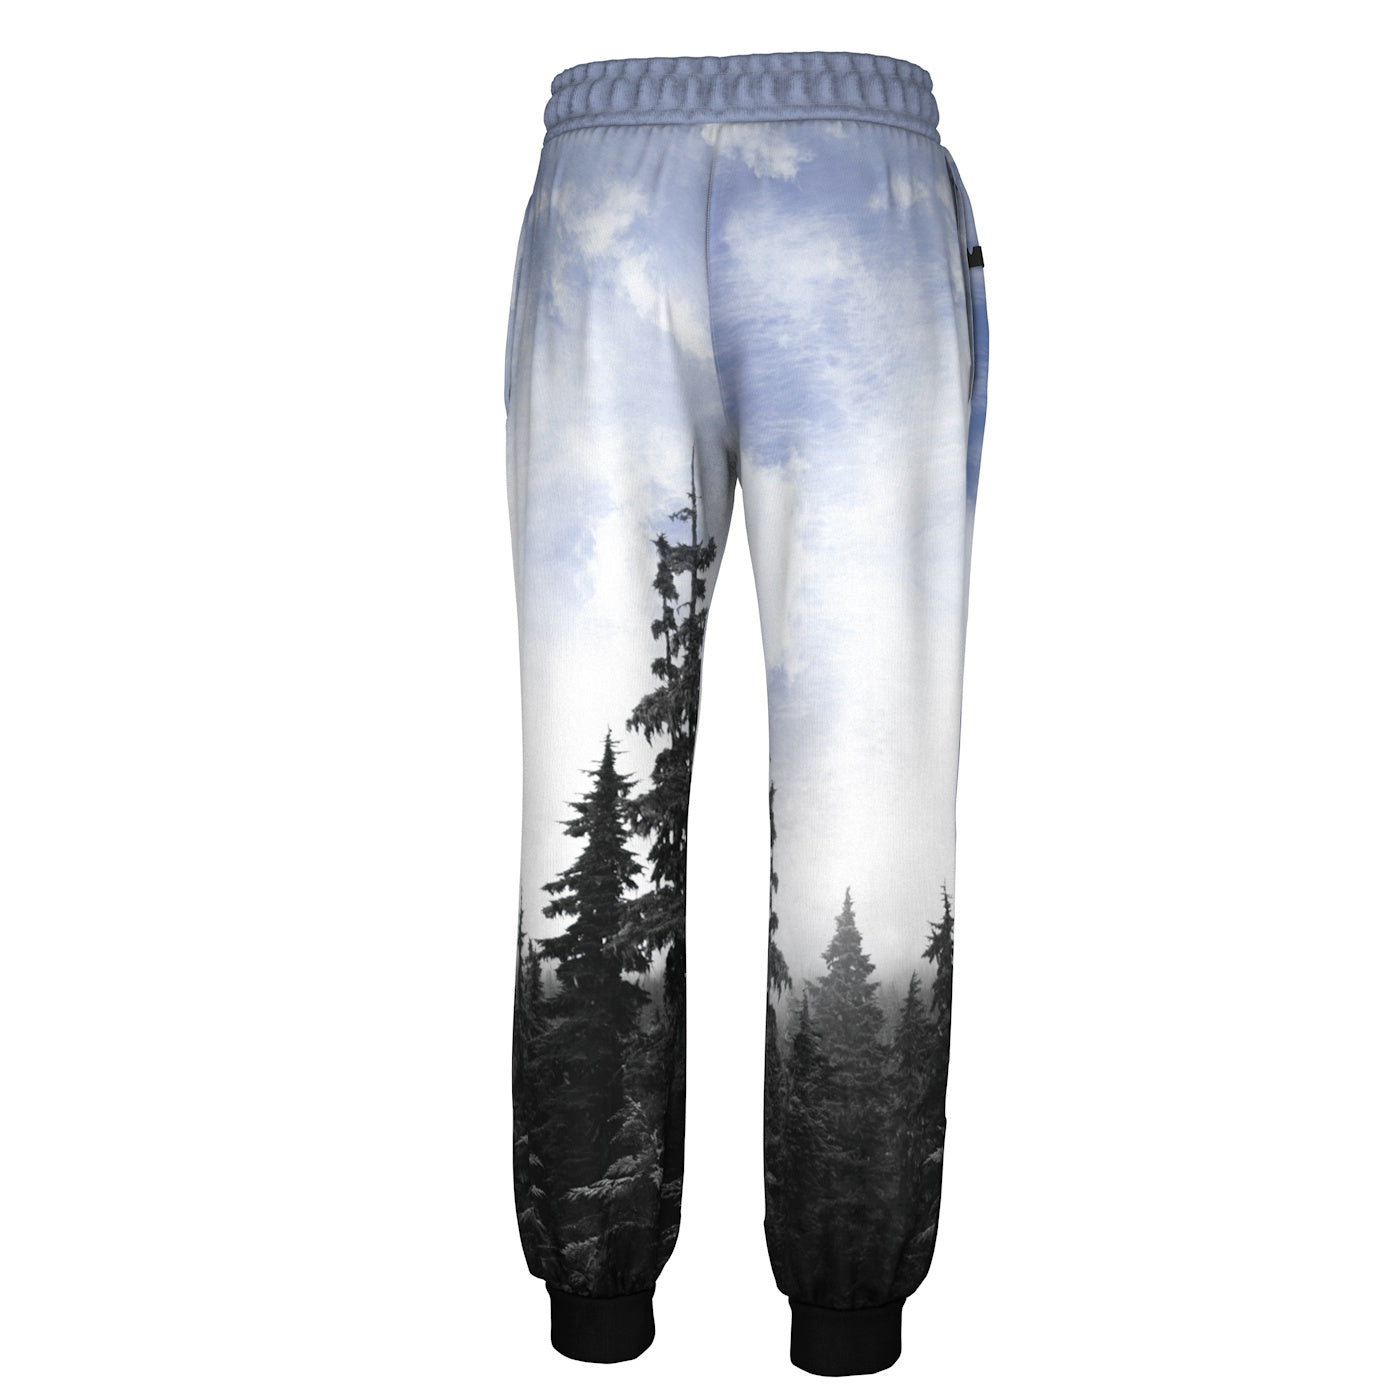 In The Forest Sweatpants